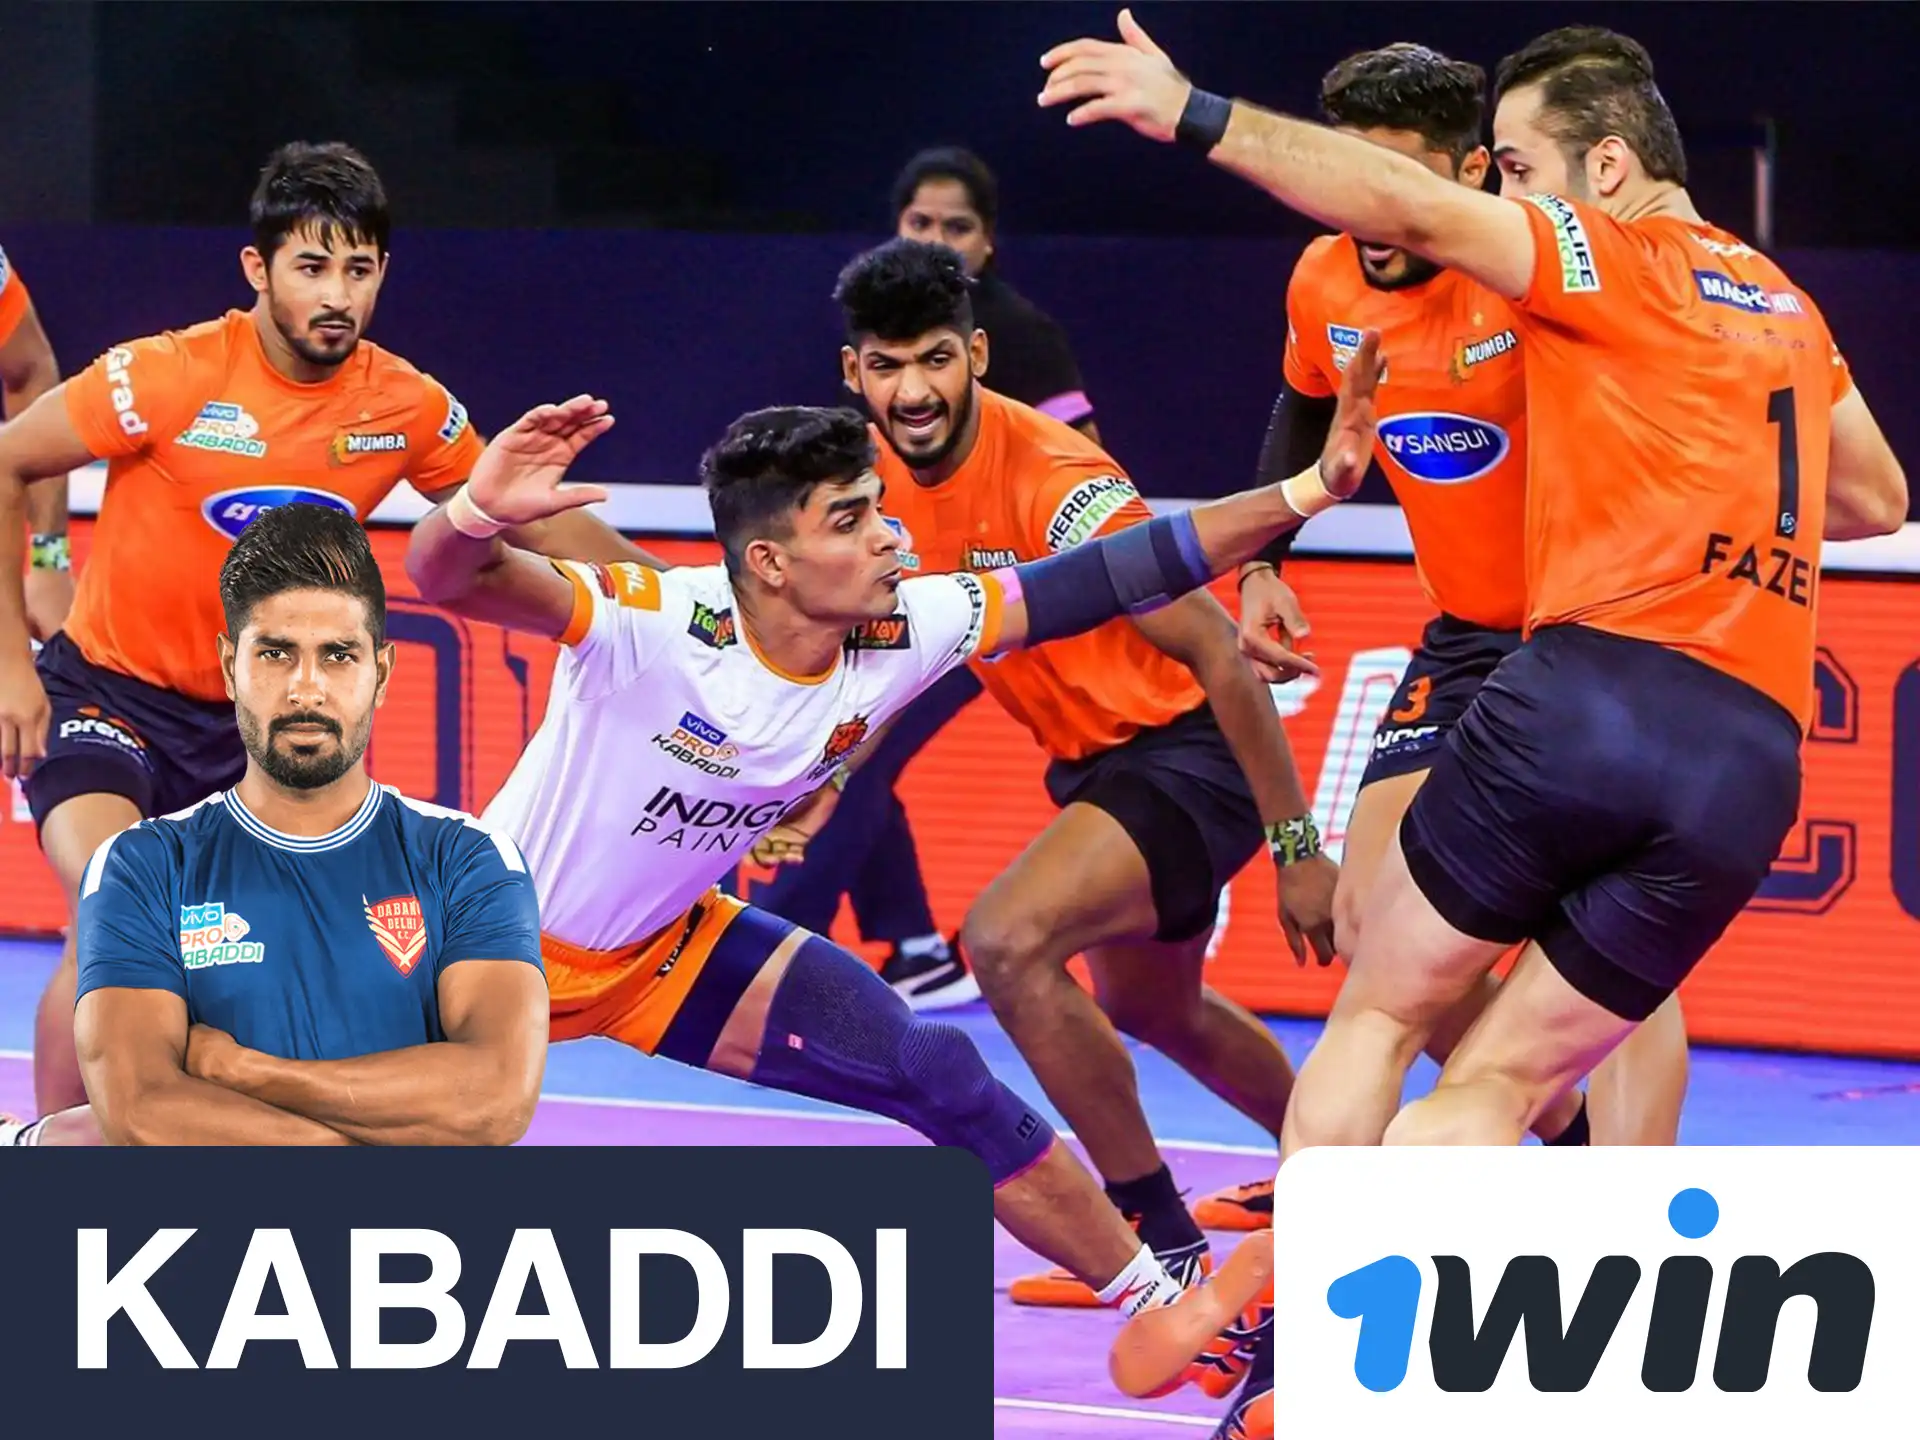 Bet on your favourite kabaddi team at 1win.